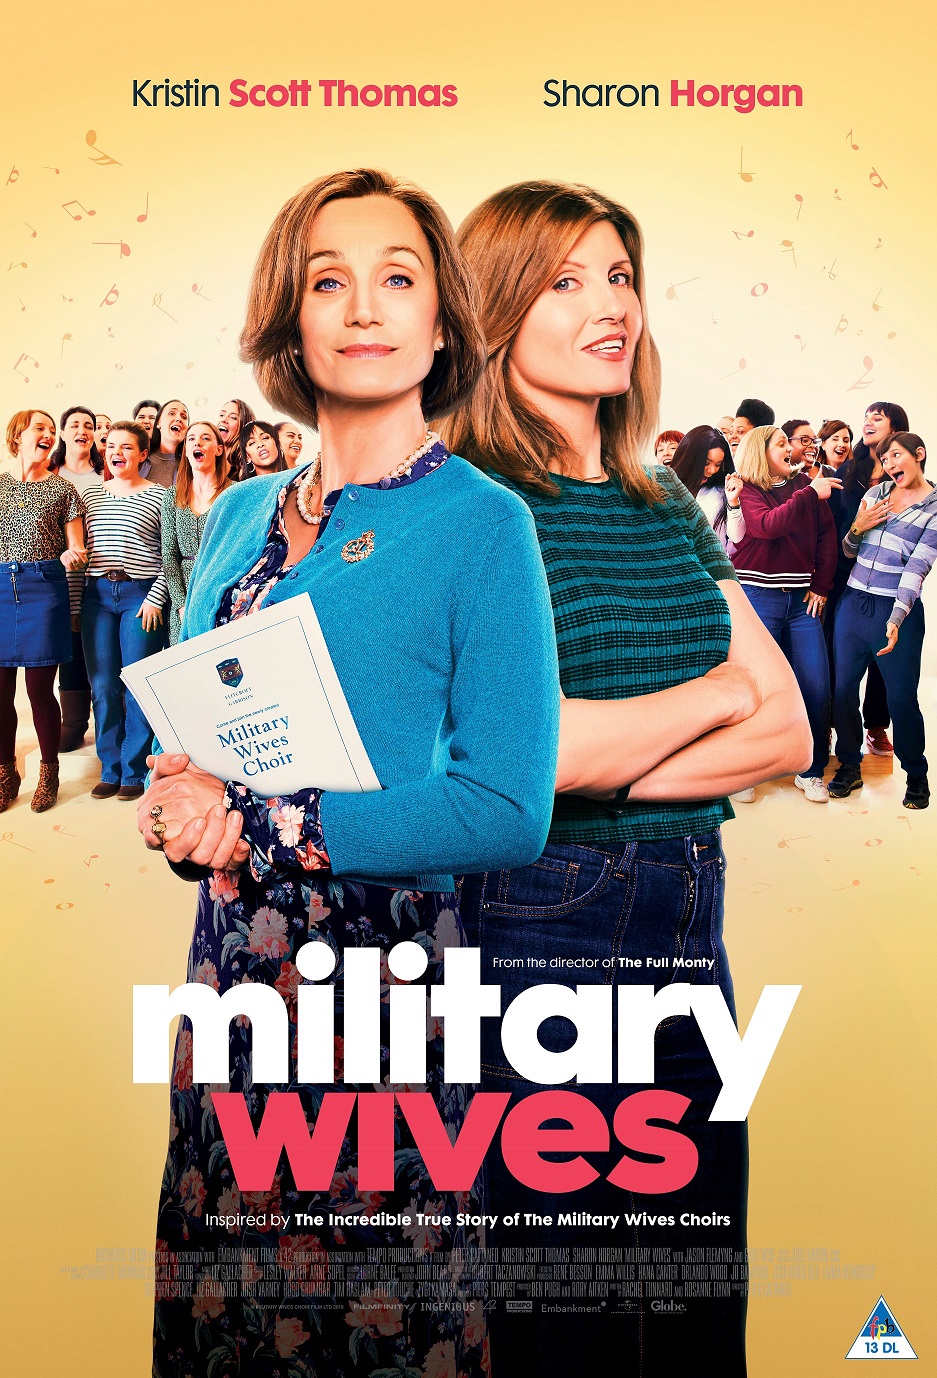 MILITARY WIVES is a feel-good and inspirational story of friendship, love, and support on the home front. “I hope viewers will come away from watching this film having laughed and cried with the characters, feeling inspired by the courage of the women and uplifted by hearing them belt out some classic songs,” concludes Cattaneo.